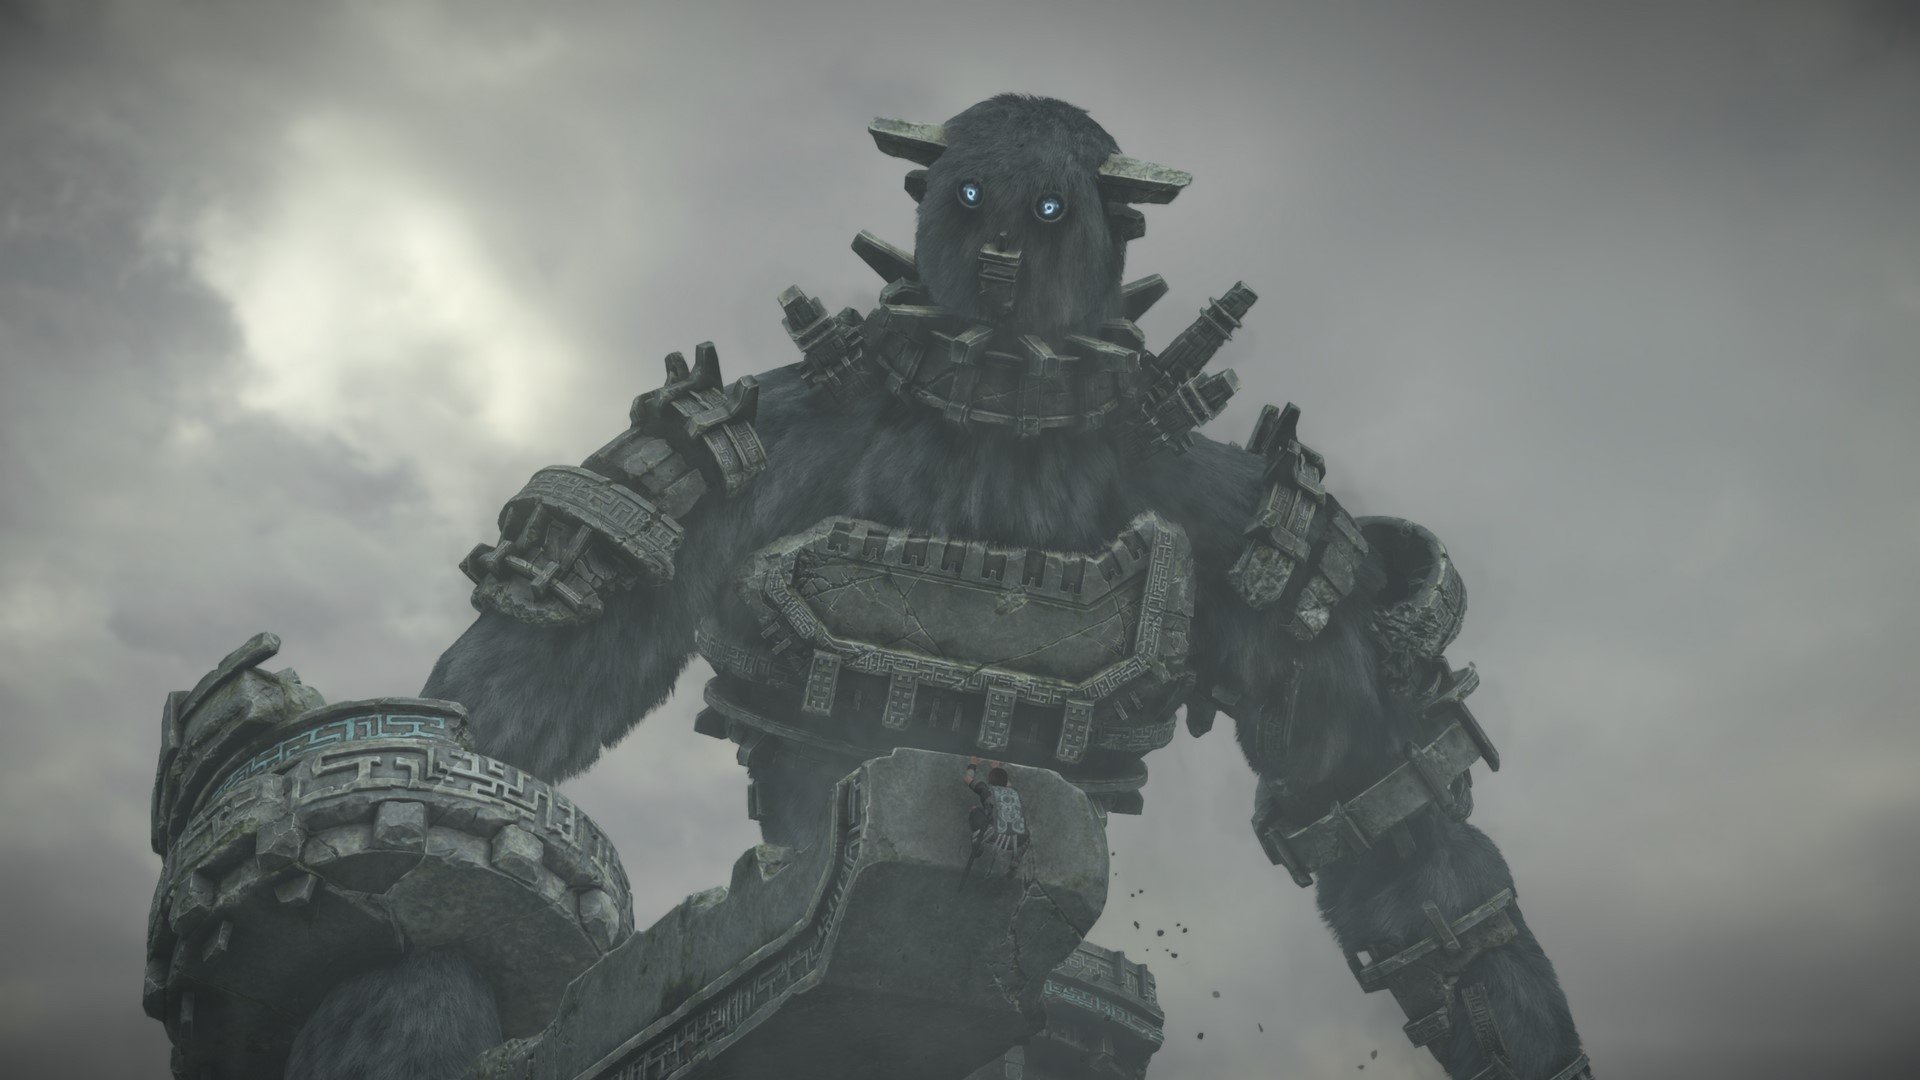 Shadow of the Colossus PS4 review: The greatest remake you'll ever play